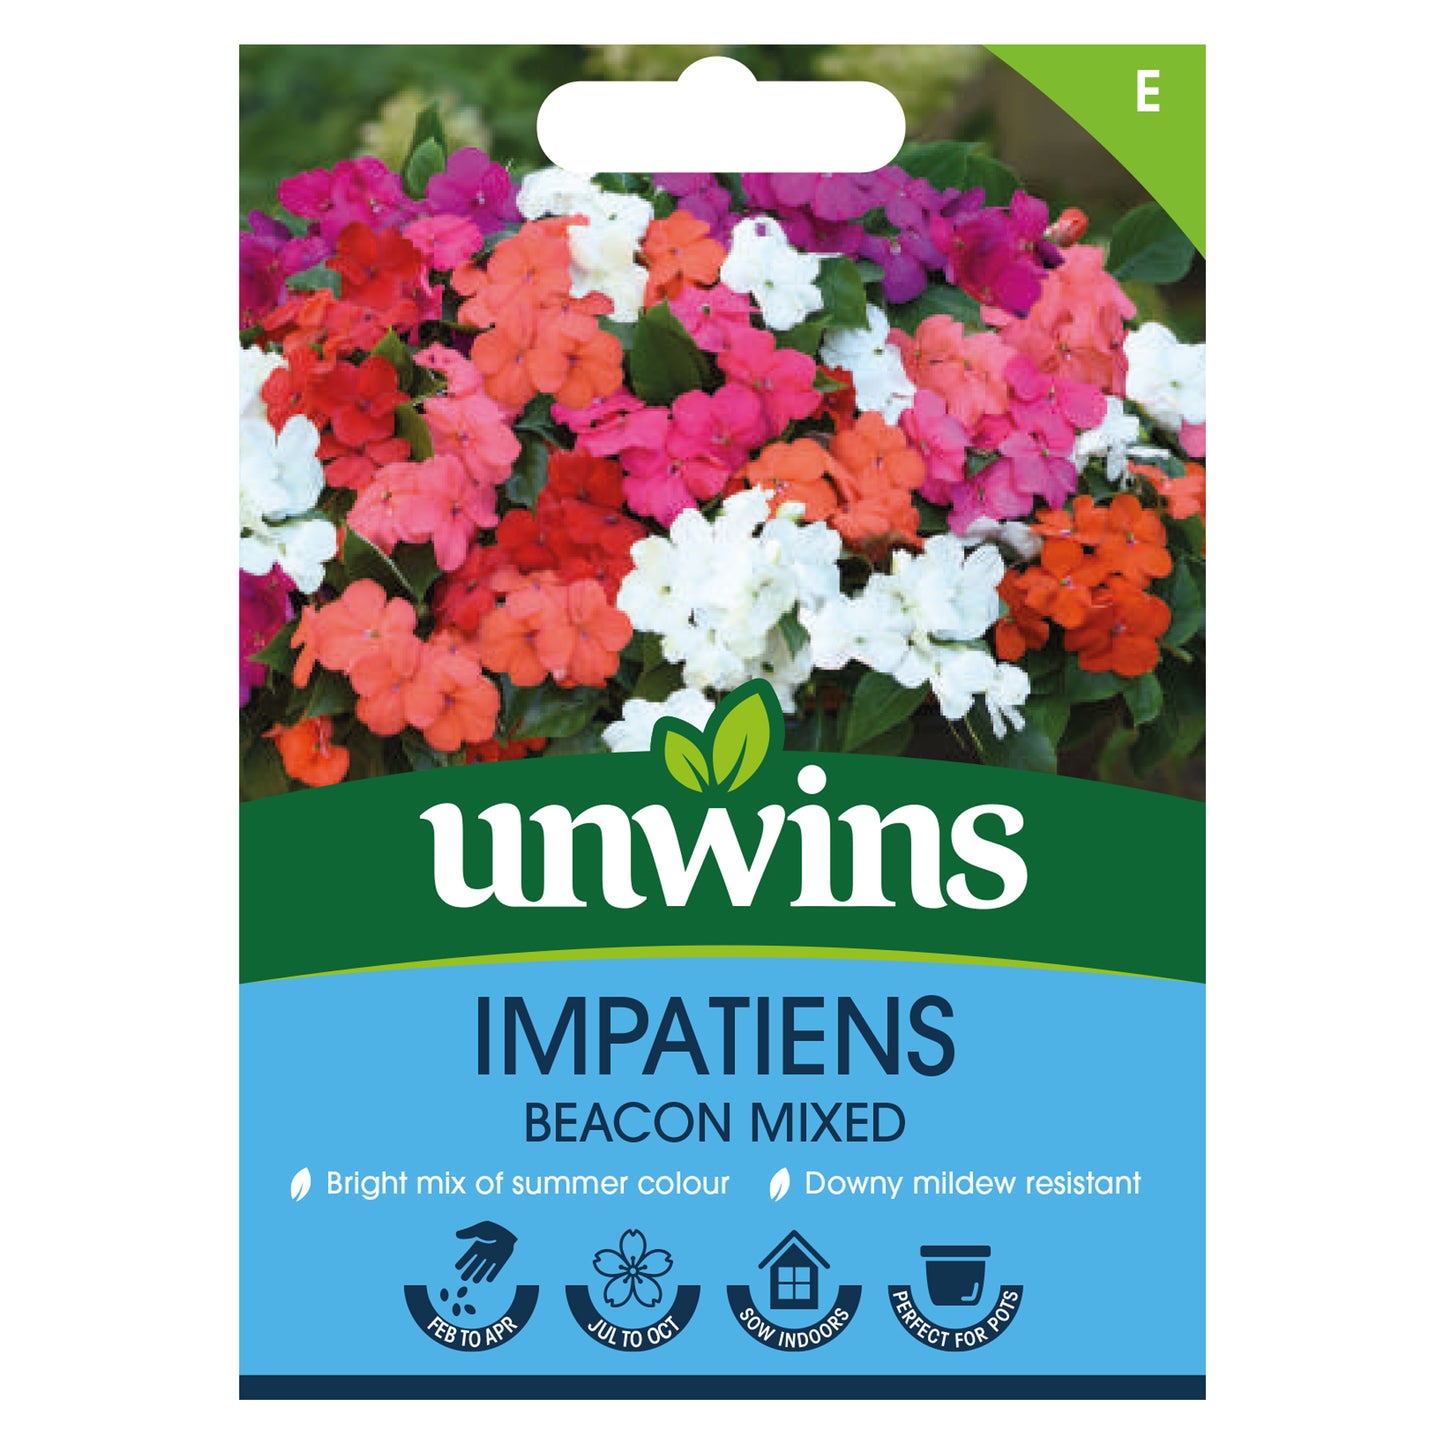 Unwins Impatiens Beacon Mixed Seeds front of pack